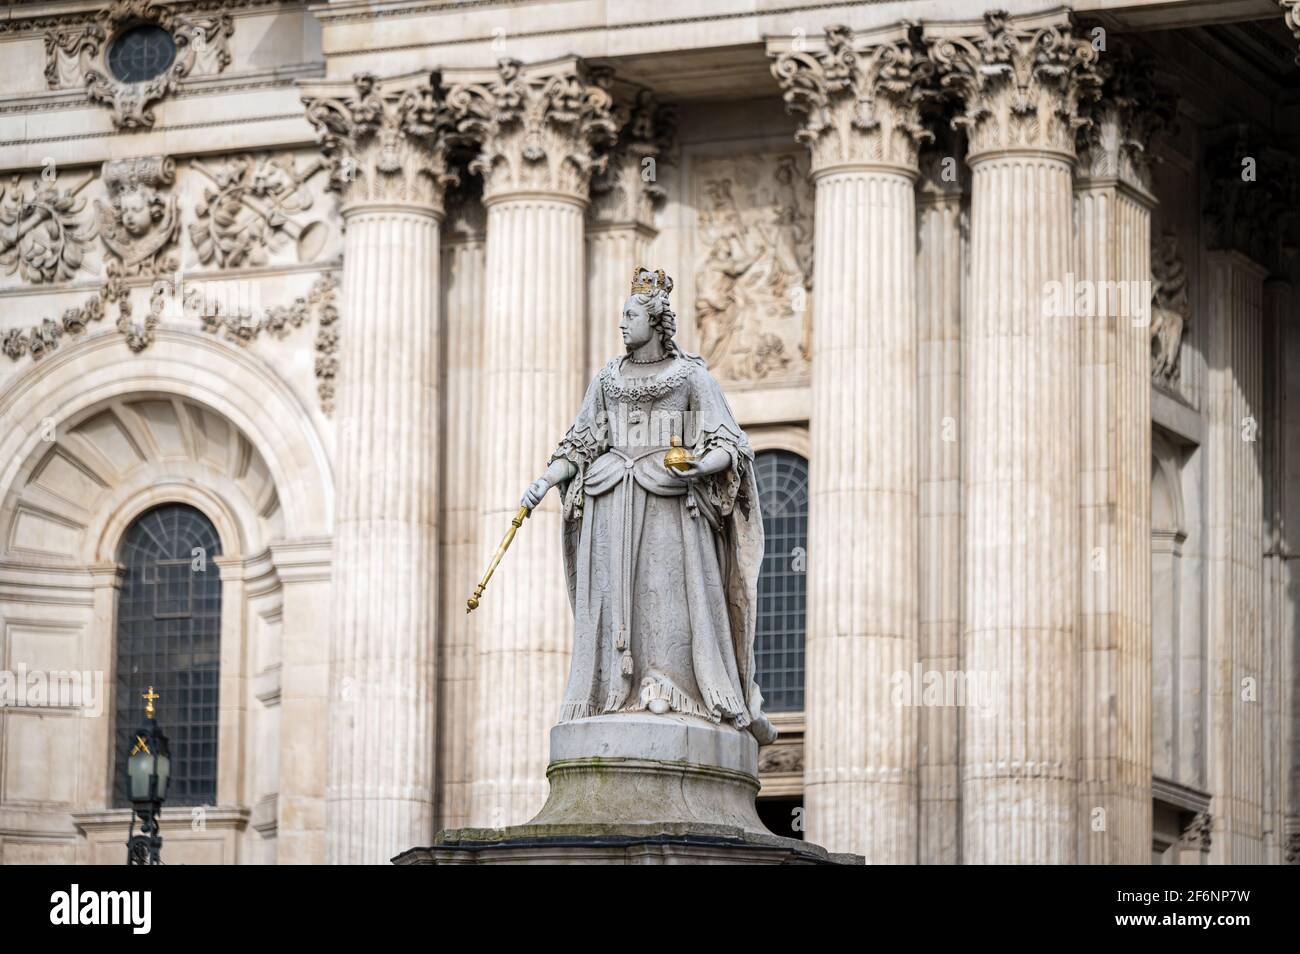 Statue of Queen Anne, outside St Paul's Cathedral, London, UK Stock Photo